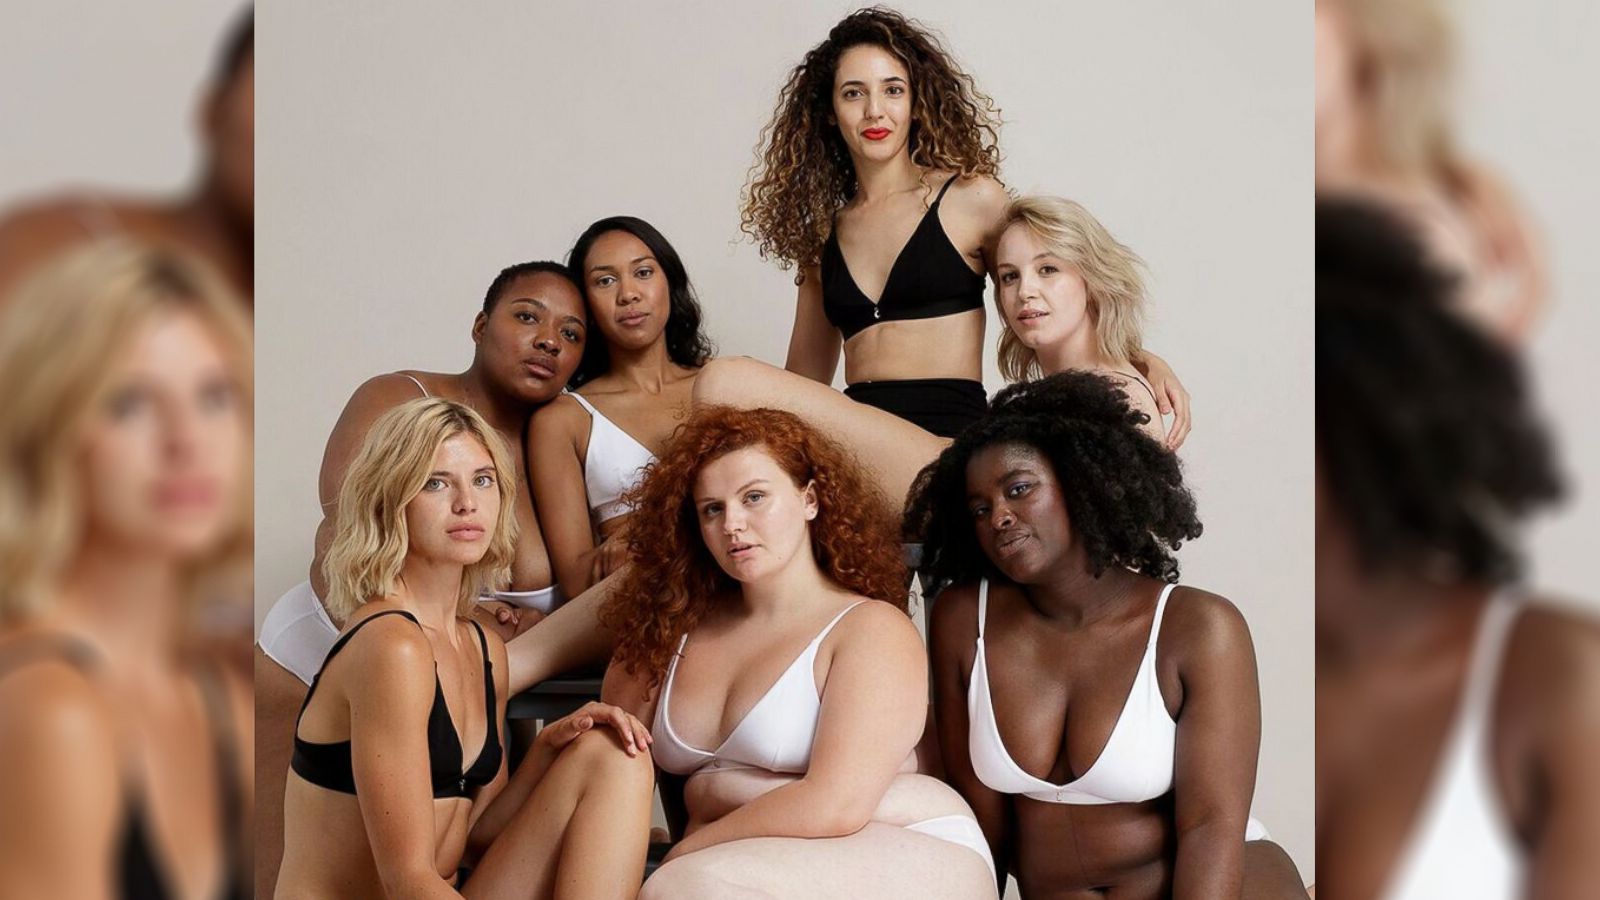 The designers changing the conversation around lingerie